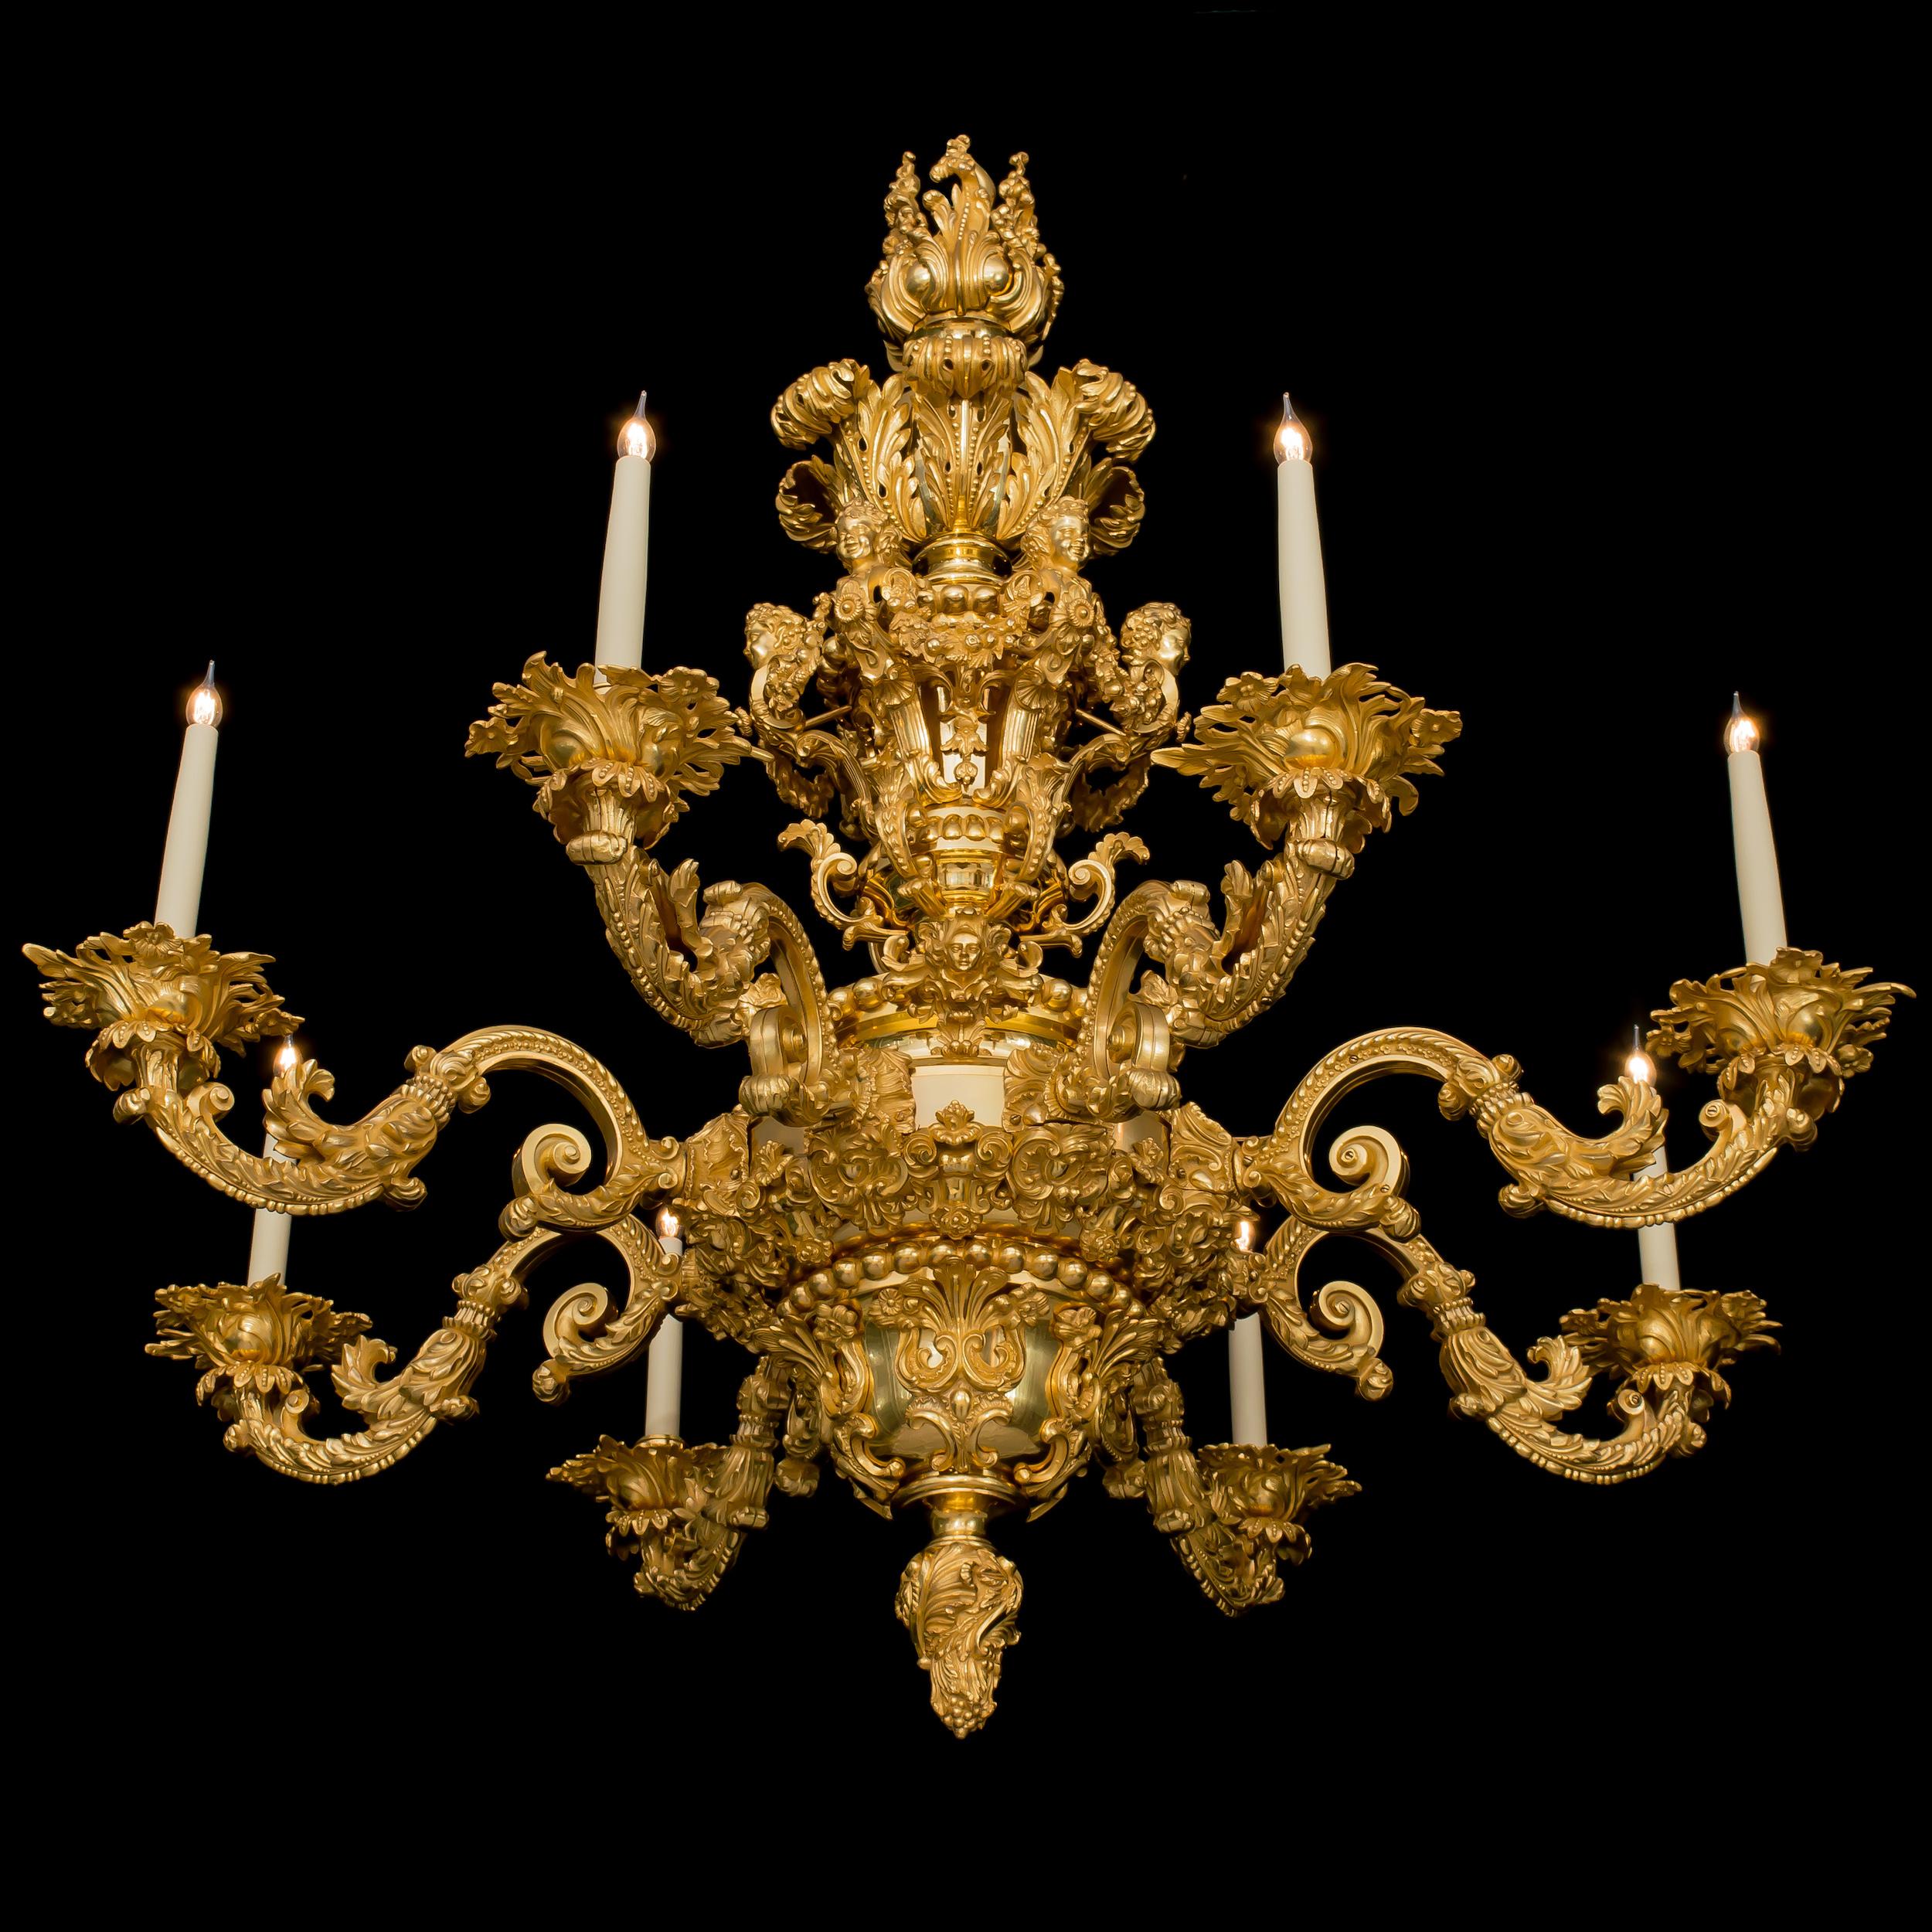 A George IV period gilt bronze chandelier
In the Régence Manner
By Messenger & Phipson

The 8-light chandelier of gilt bronze constructed around a central baluster and vasiform stem incorporating a bowl with tapering finial, the whole